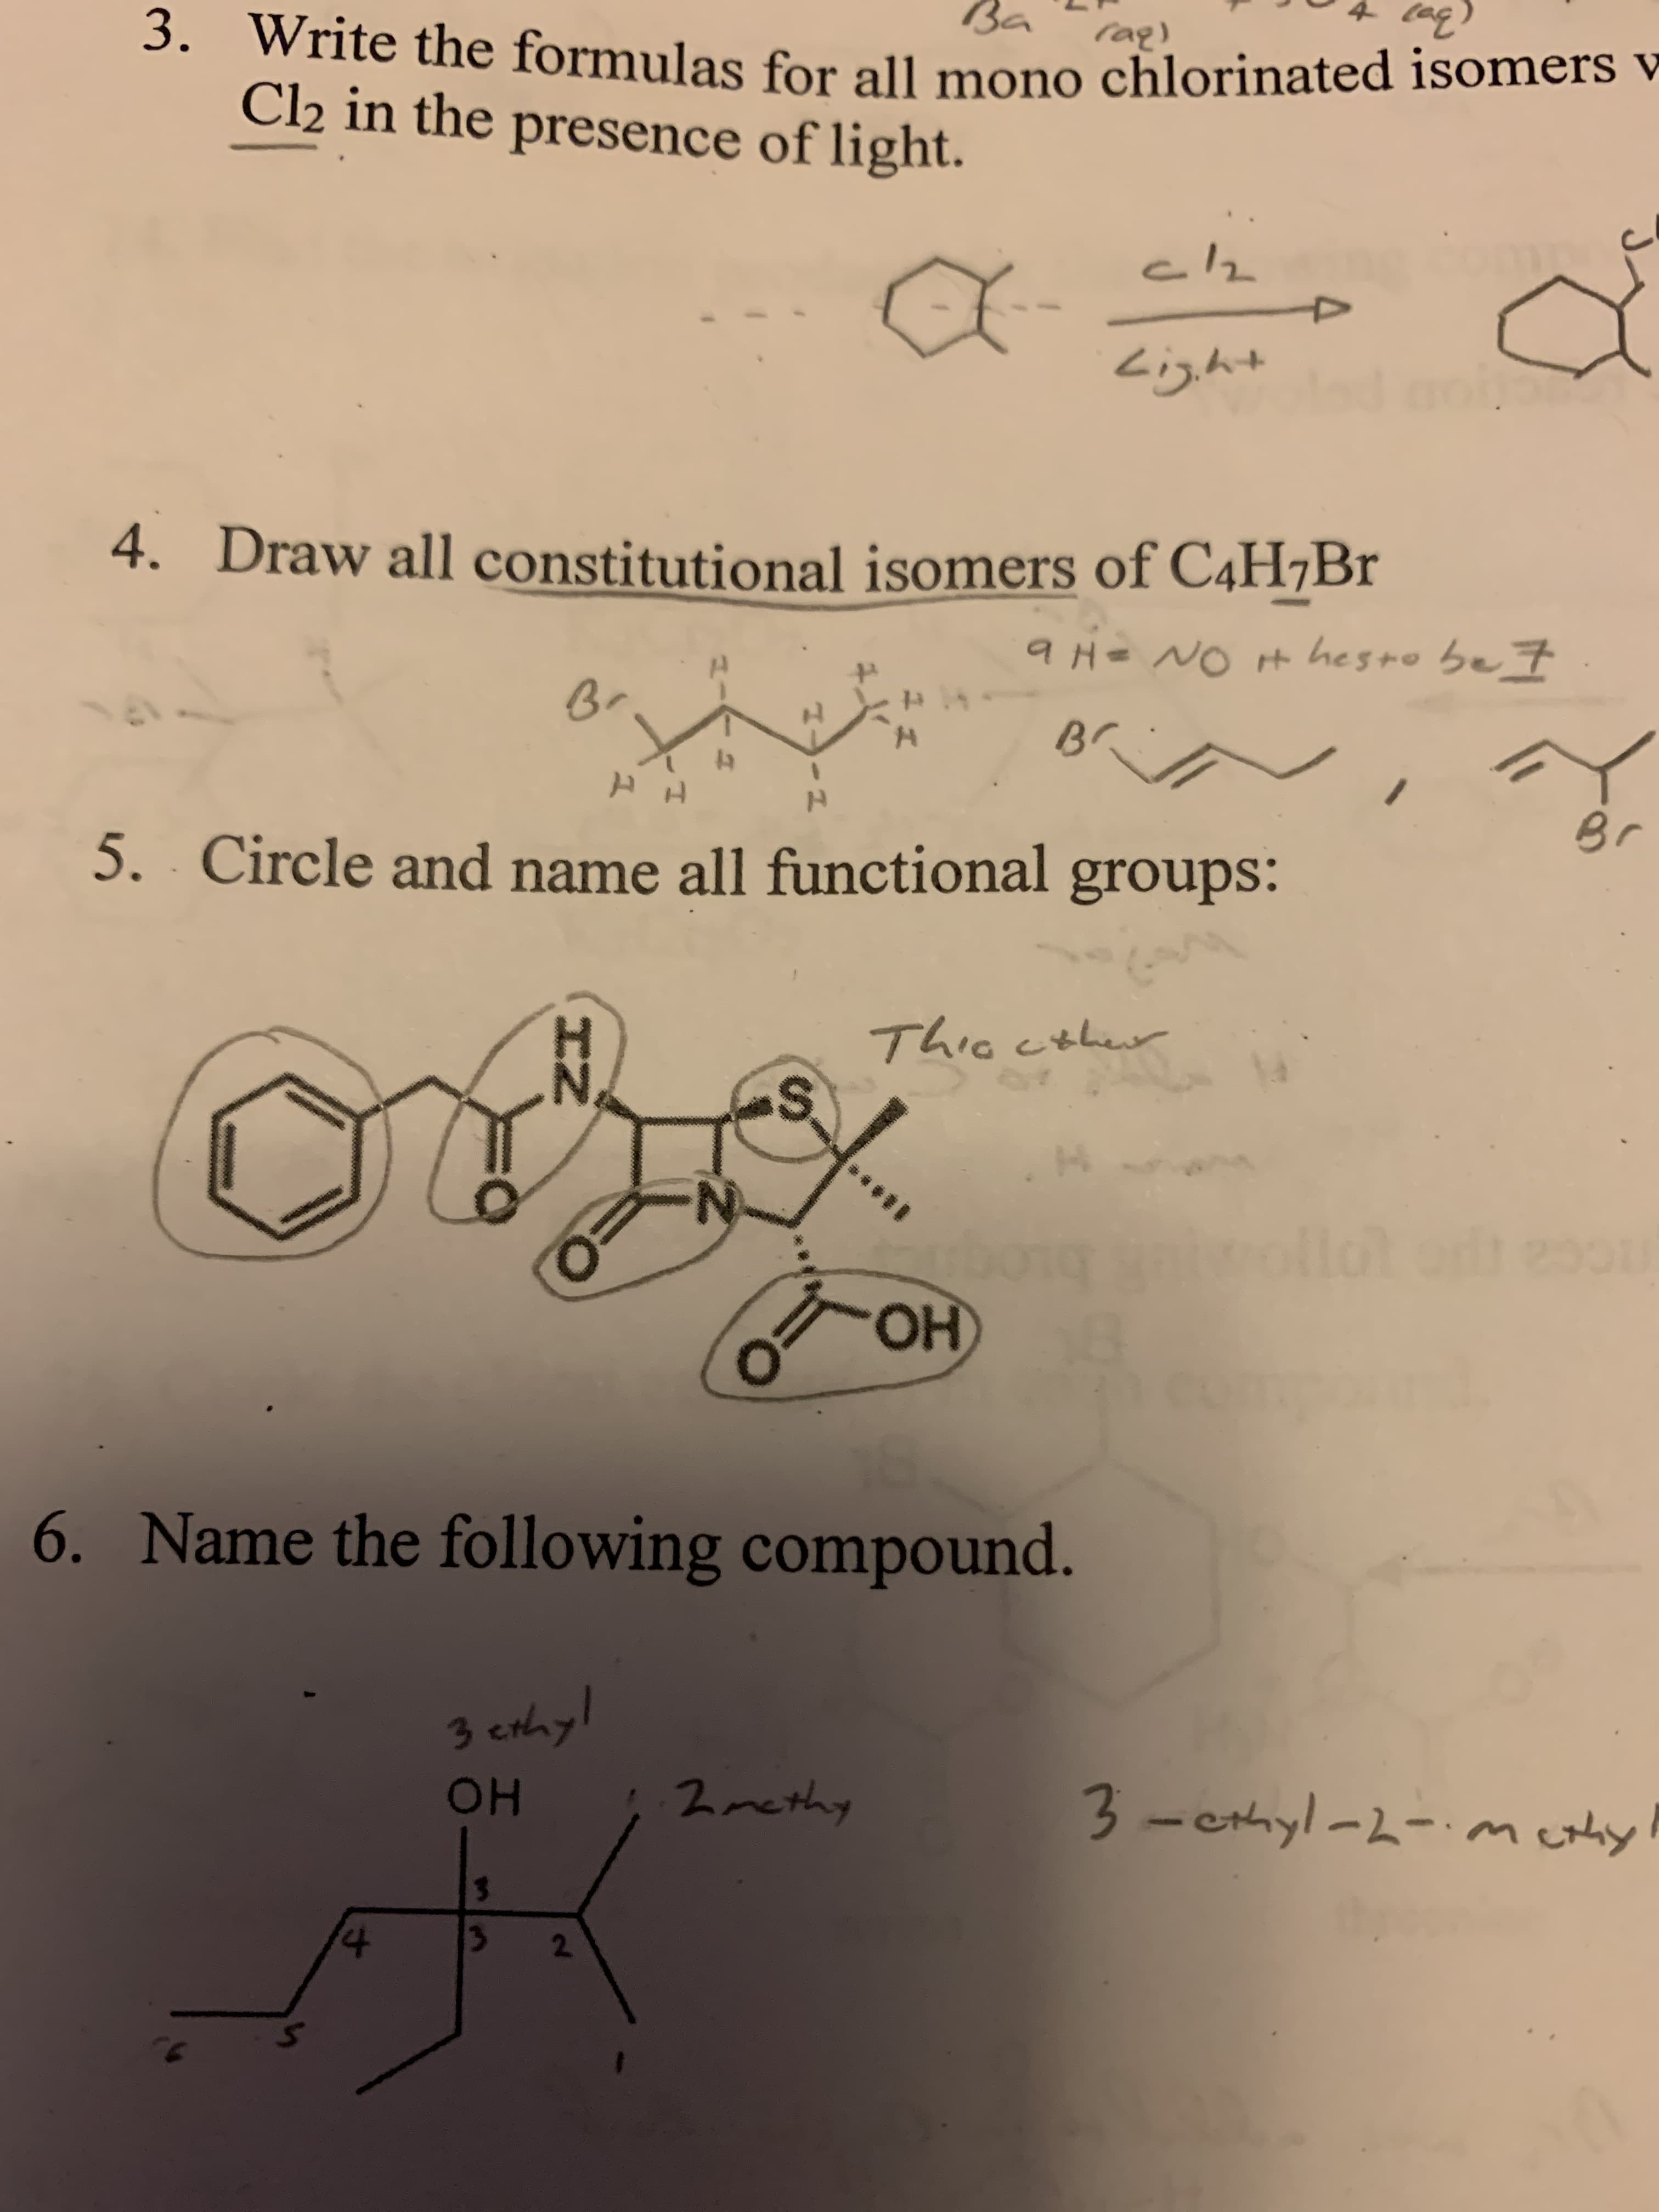 Ba
3. Write the formulas for all mono chlorinated isomers v-
Cl2 in the presence of light.
rag)
Light
4. Draw all constitutional isomers of C4H7B1
9H= NO H hesro be 7
в.
Bく
Br
5. Circle and name all functional groups:
Thiscther
N.
llo
bo
ОН
2001
6. Name the following compound.
3 cthyl
он
2methy
3
cthyl-2-id
mcthy
3.
2
2.
4.
